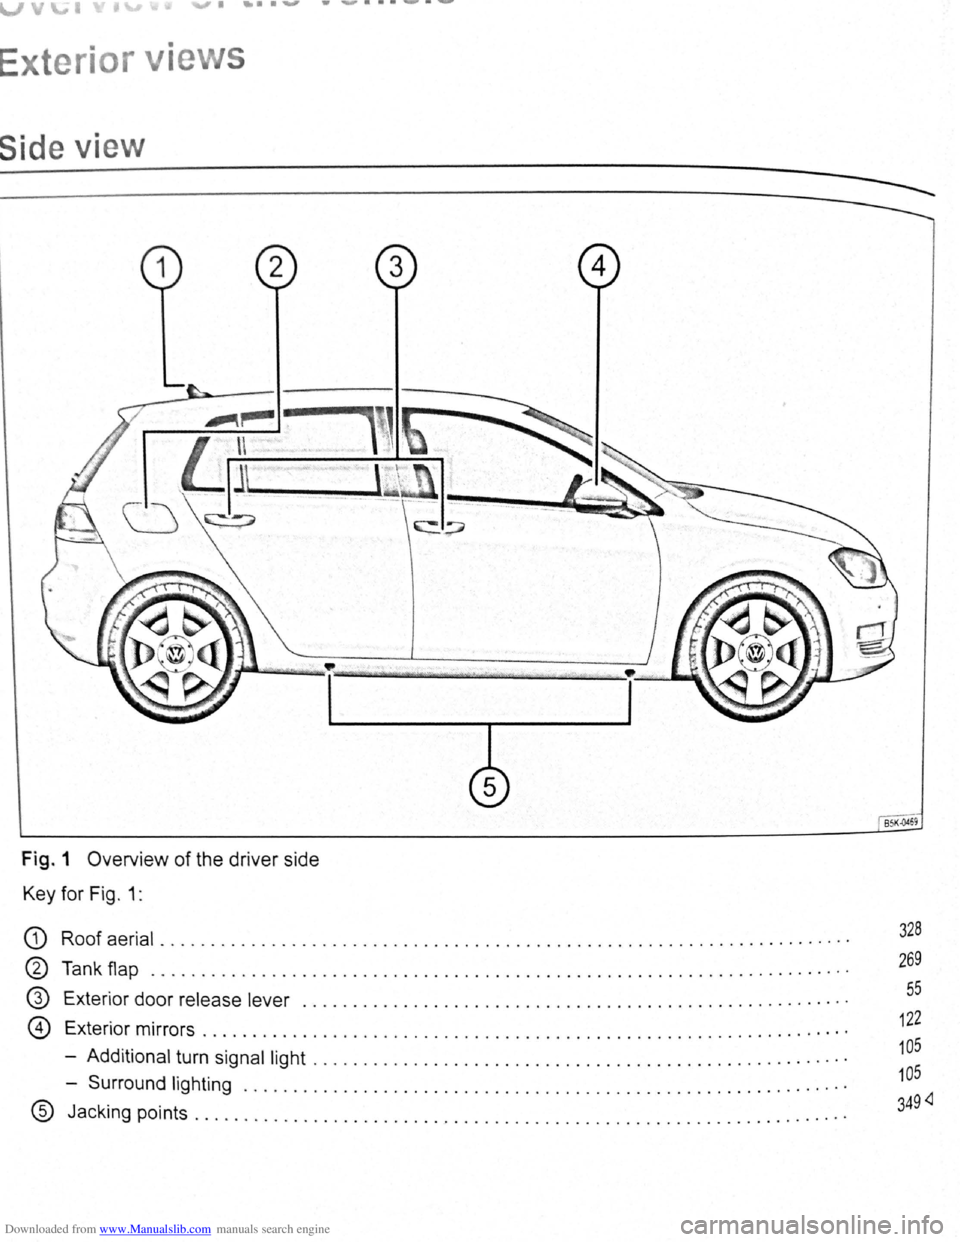 VOLKSWAGEN GOLF 2011  Owner´s Manual Downloaded from www.Manualslib.com manuals search engine V \...1 tv ...., .......................... ..... 
Exterior views 
Side view 
Fig.  1 Overview of the  driver  side 
Key  for Fig. 1: 
G) Roof 